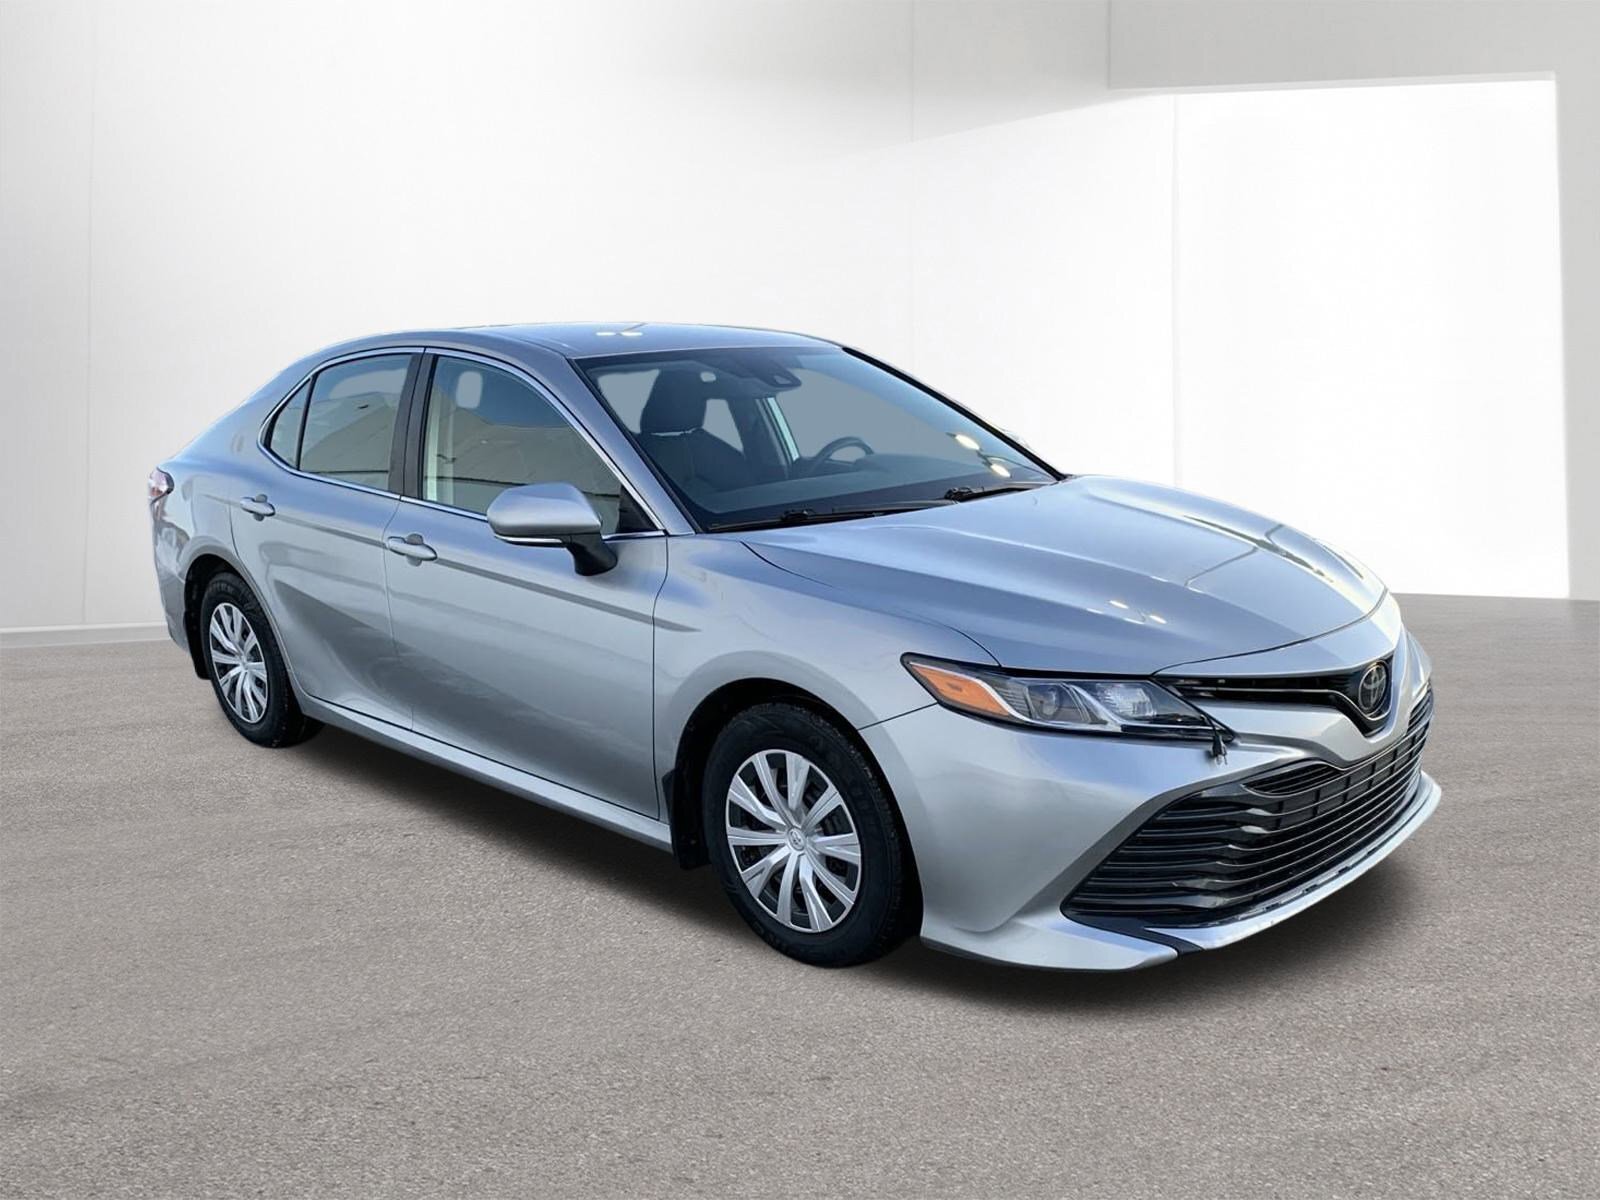 2019 Toyota Camry LE - great commuter car, gas savings!